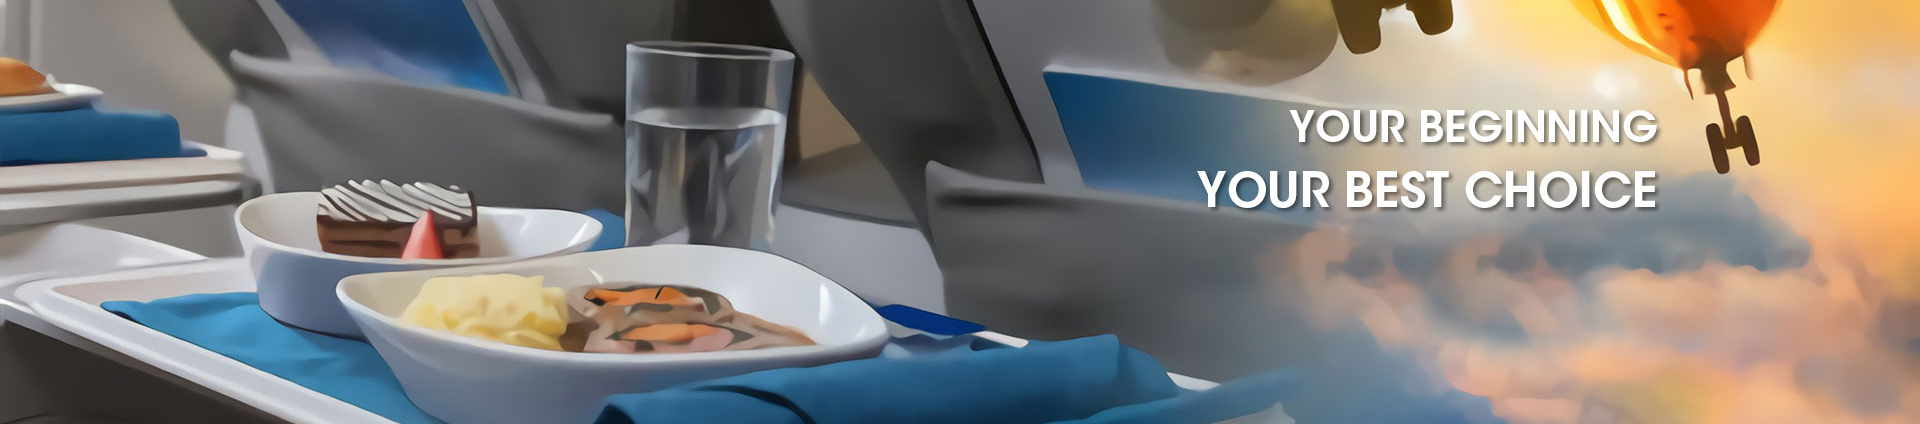 Airline Paper Meal Boxes Balance Environmental Concerns